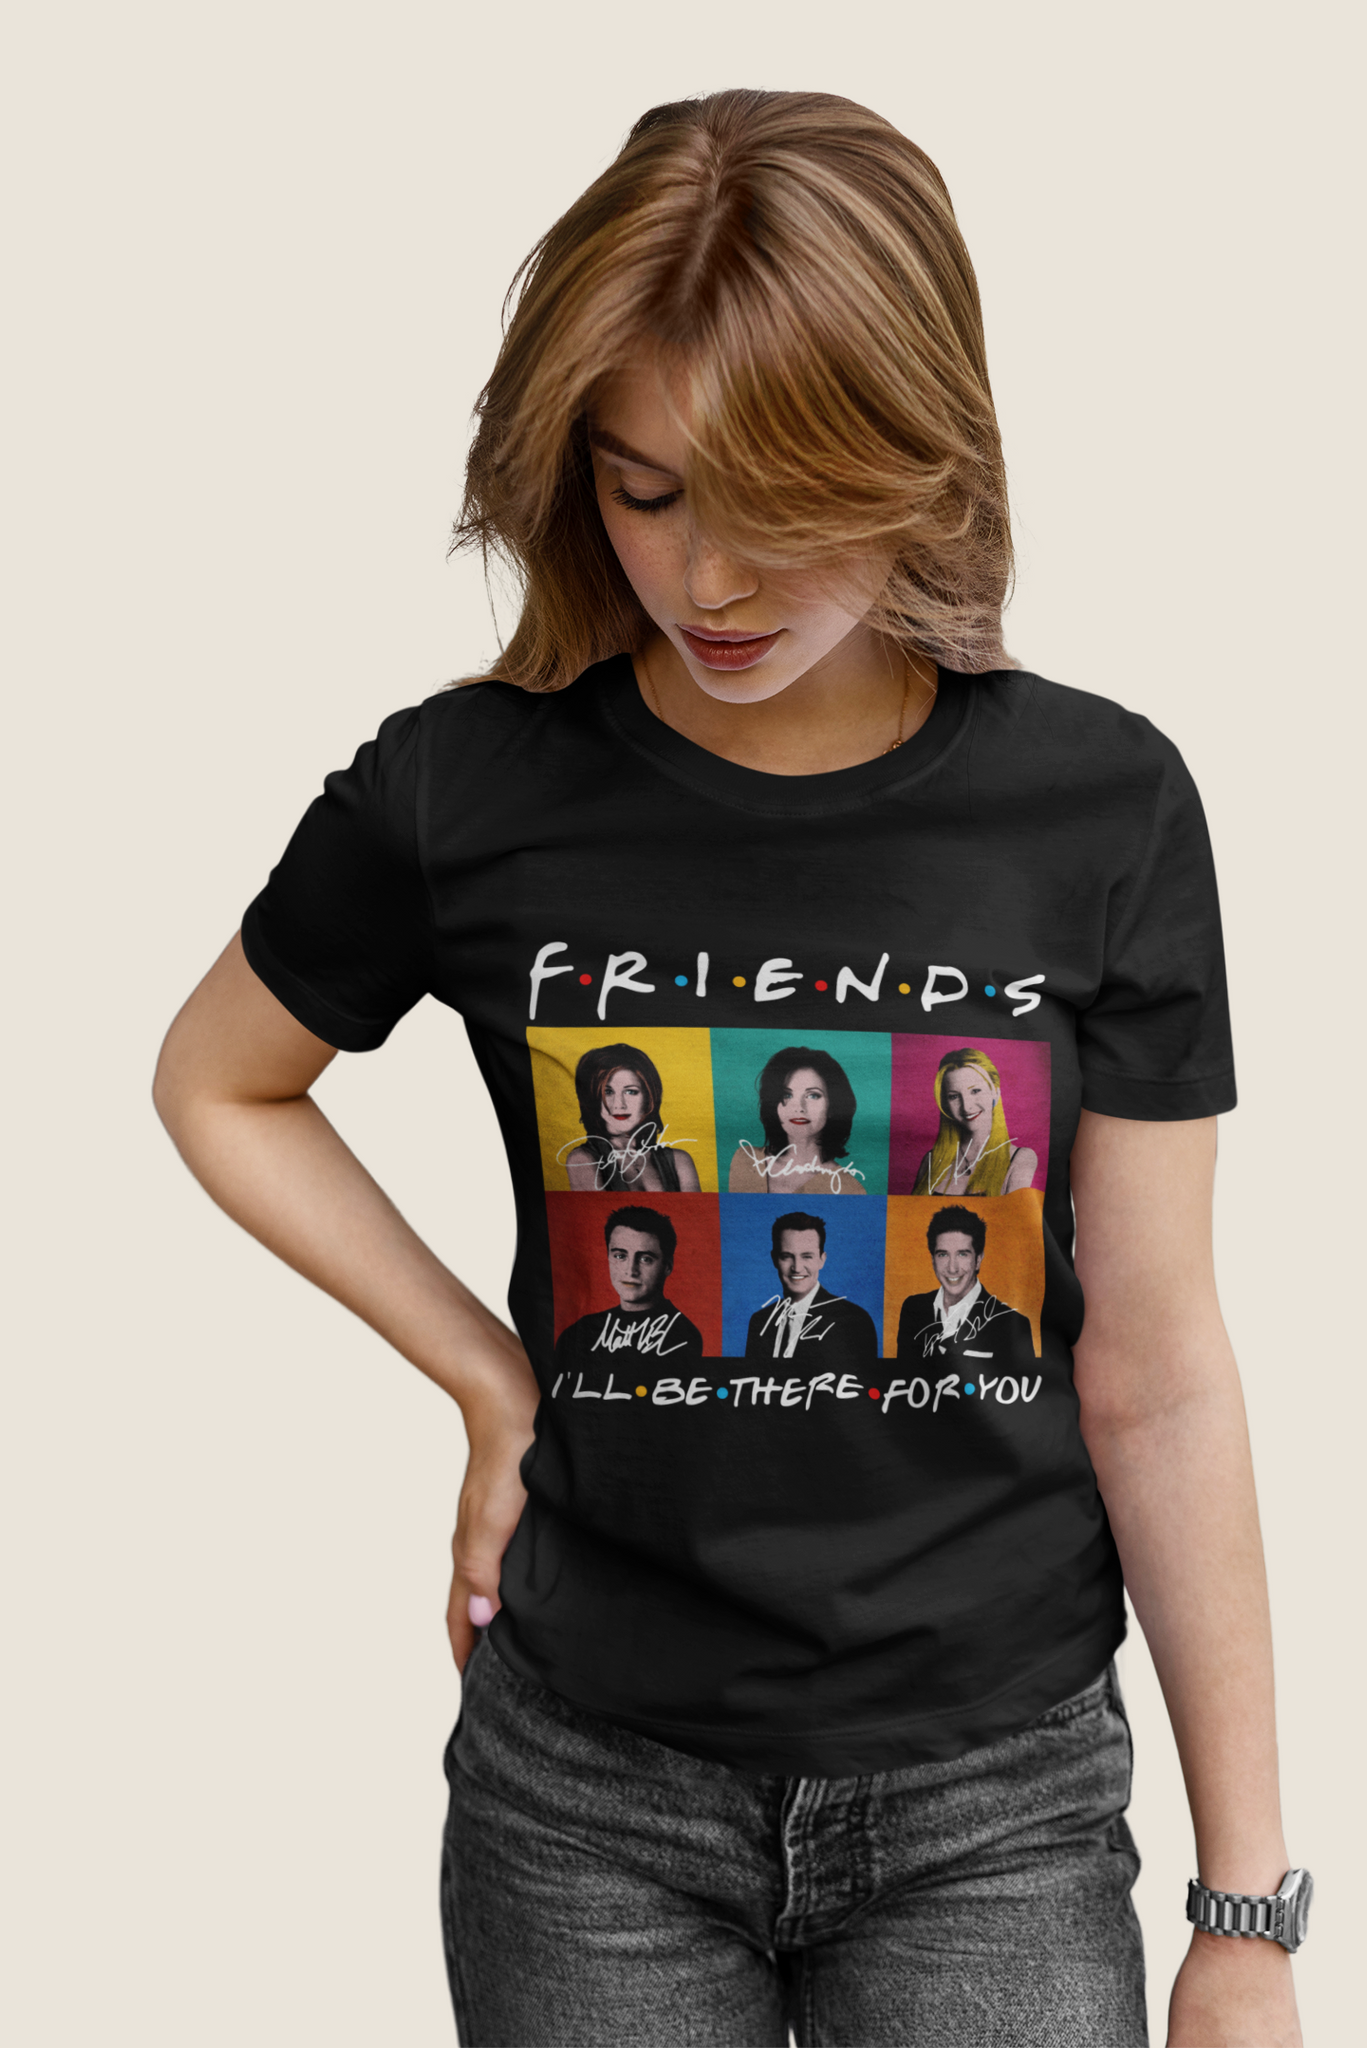 Friends TV Show T Shirt, Friends Characters T Shirt, Ill Be There For You Tshirt